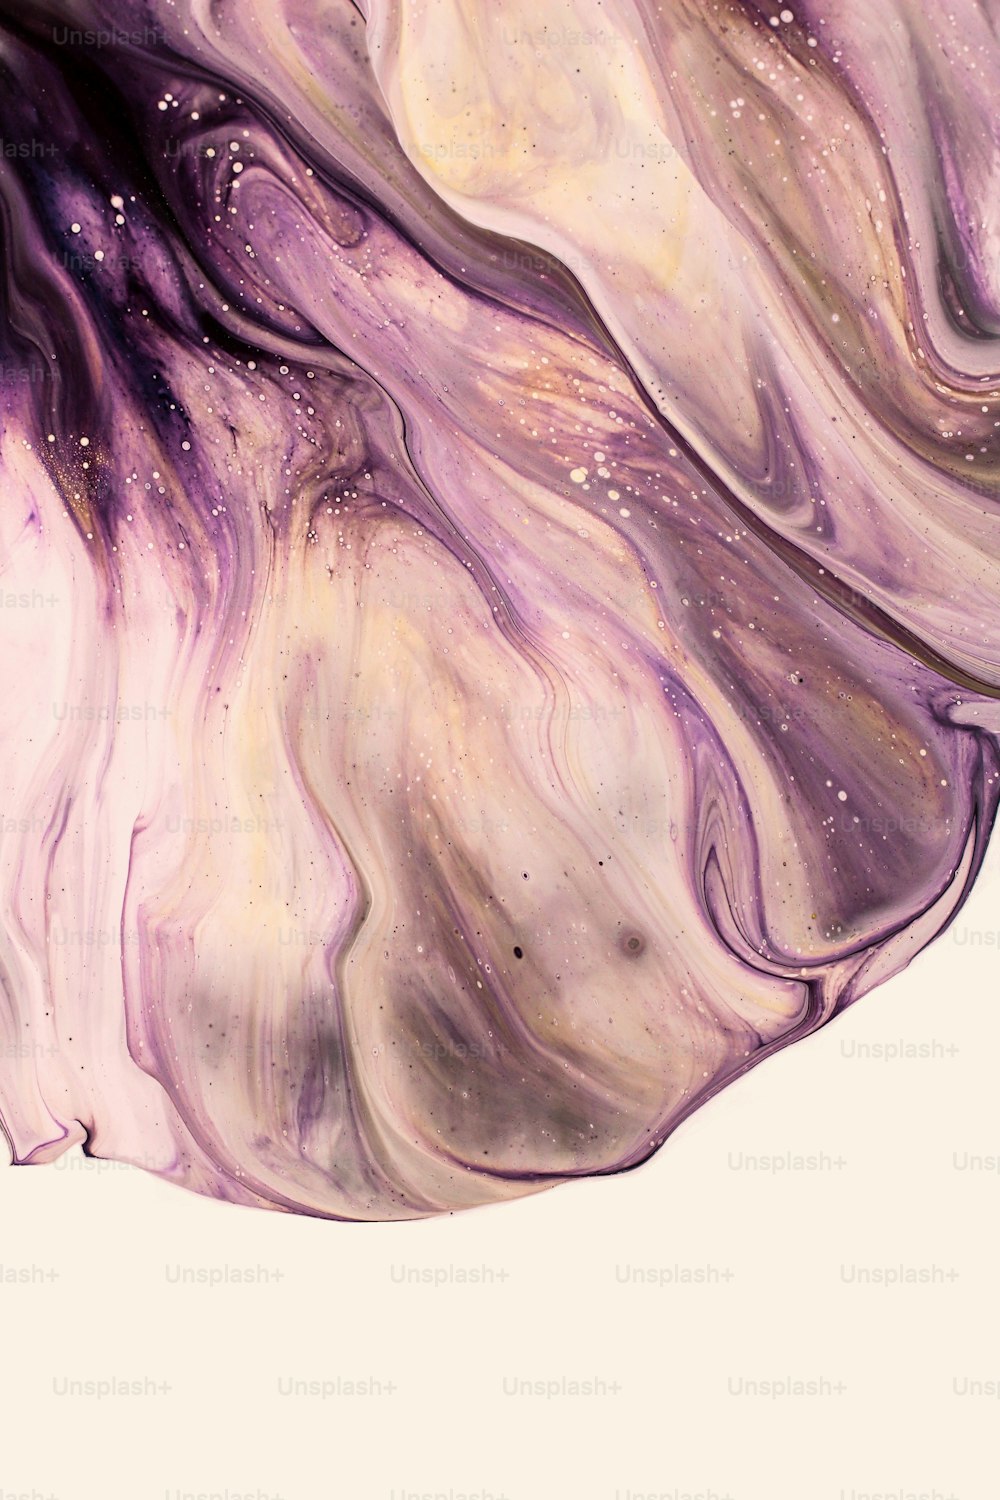 a painting of a purple and white swirl